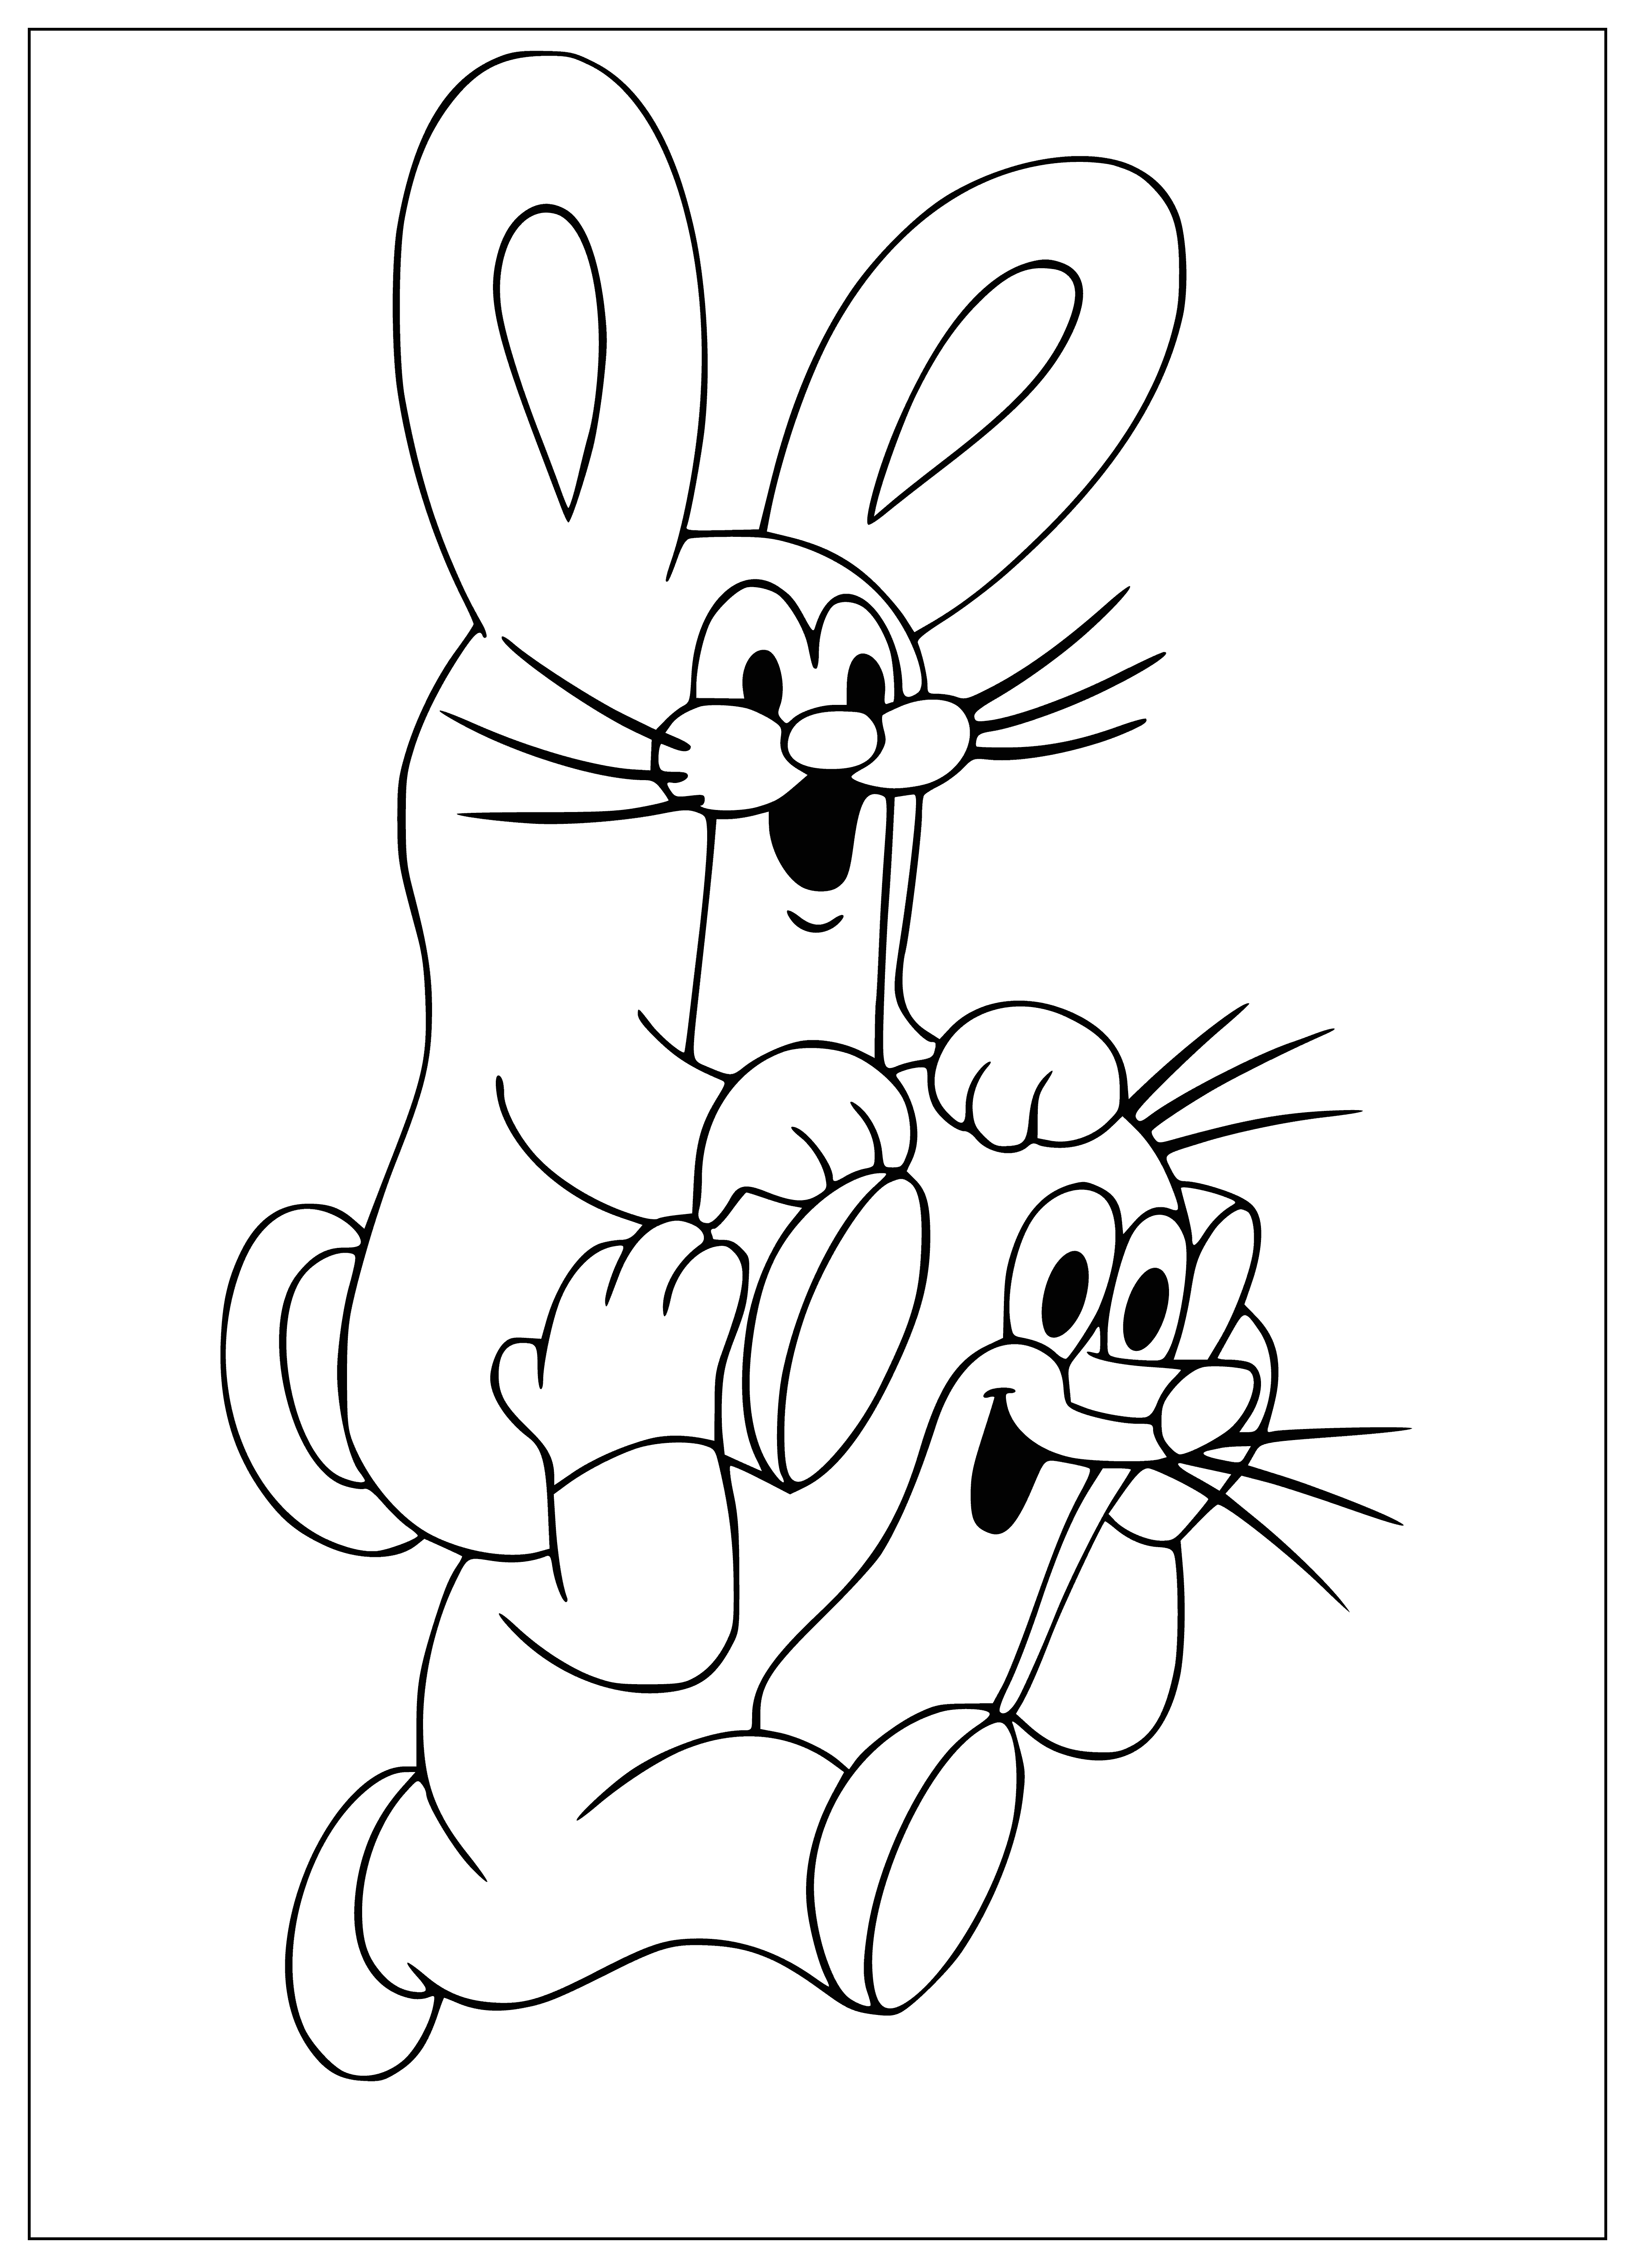 coloring page: Krtek the mole and a hare are happily looking at each other, each standing on their hind legs.